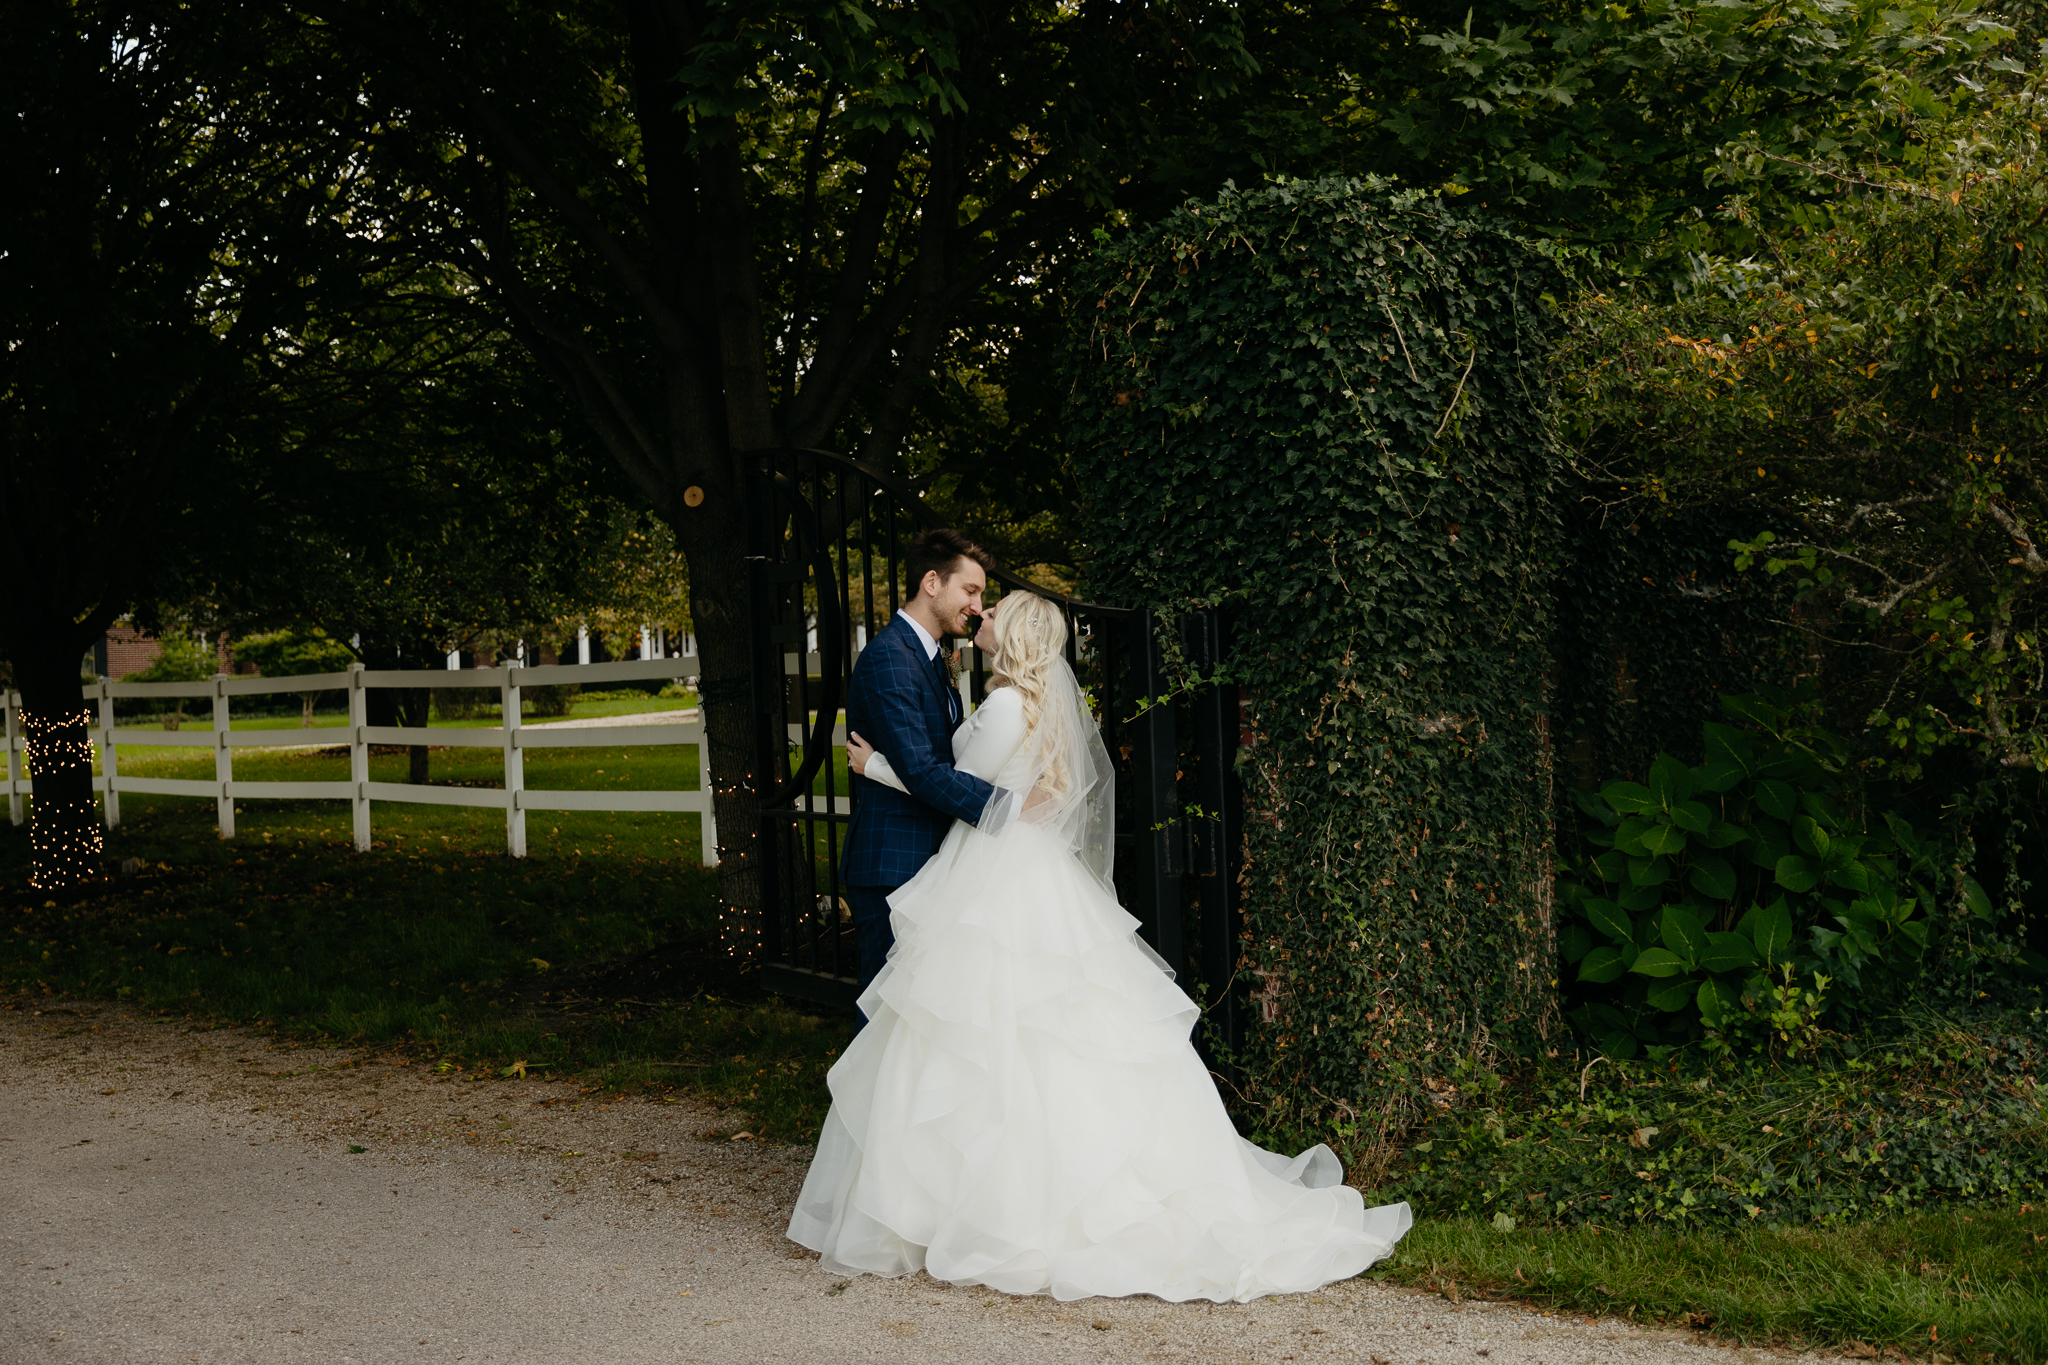 Bride and groom kiss and embrace next to an ivy covered wrought iron gate